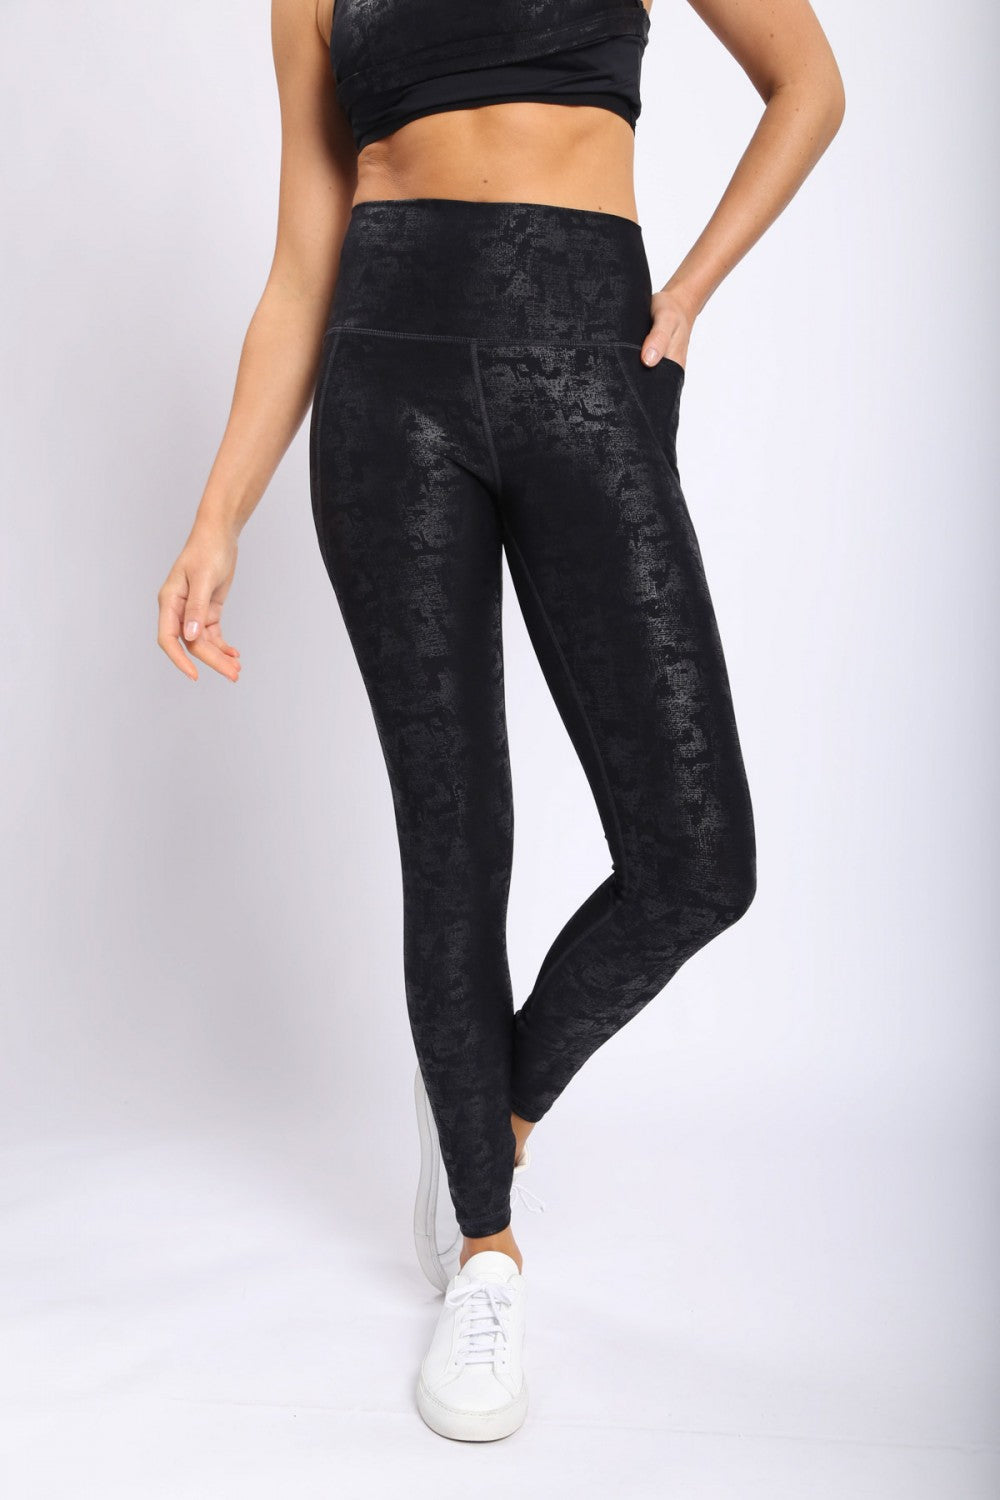 Metallic Foil High Waisted Leggings With Side Pockets